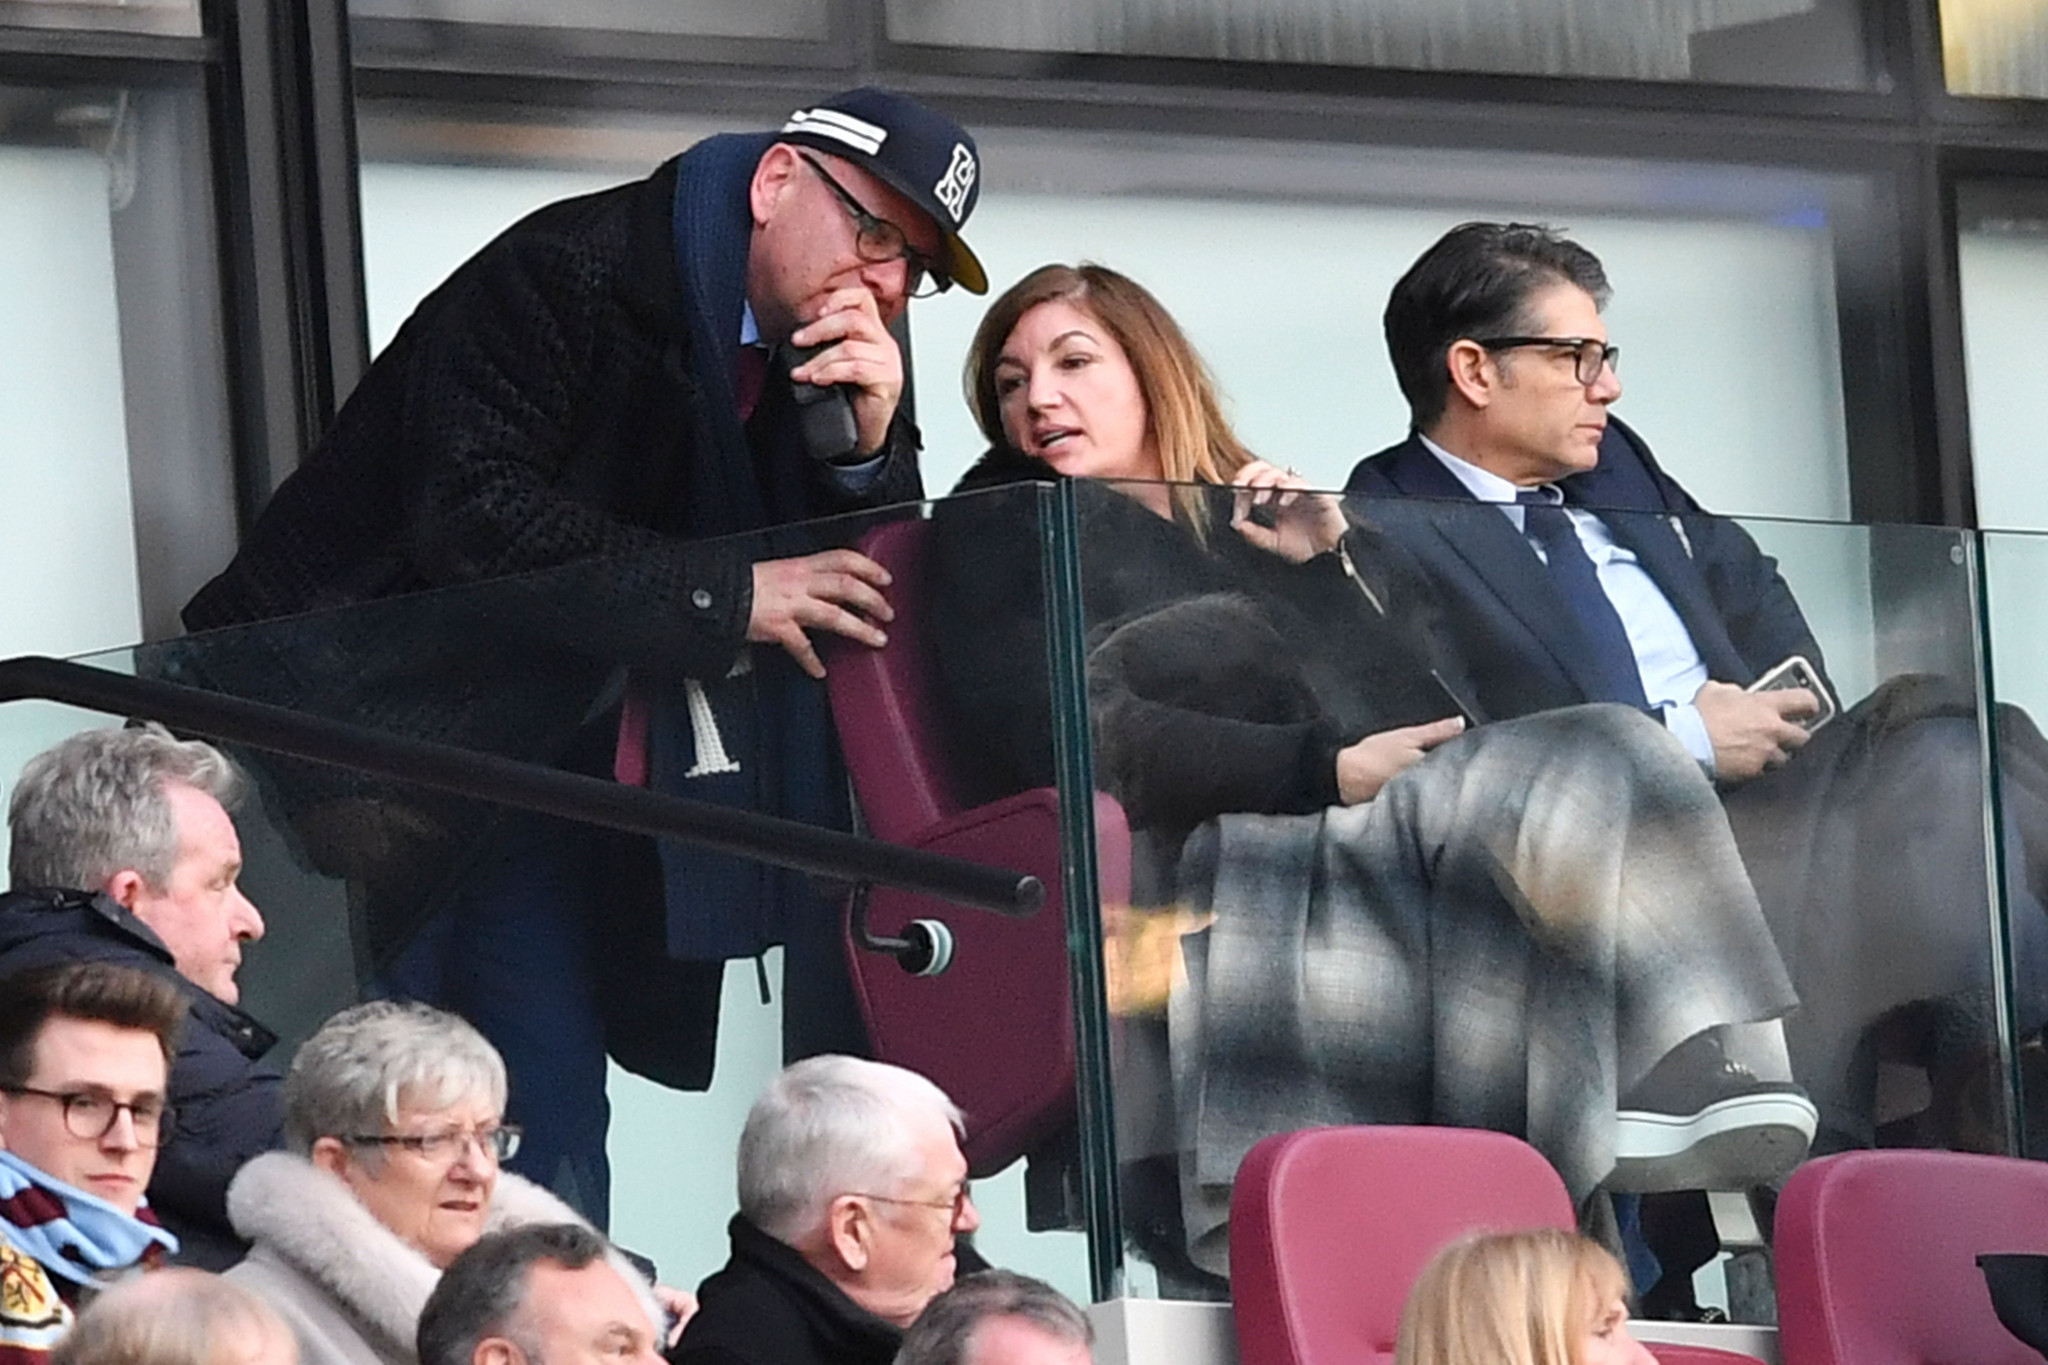 West Ham United vice-chairman Karren Brady claims she is optimistic the Premier League club will have a better relationship with London Mayor Sadiq Khan after the two held talks ©Getty Images